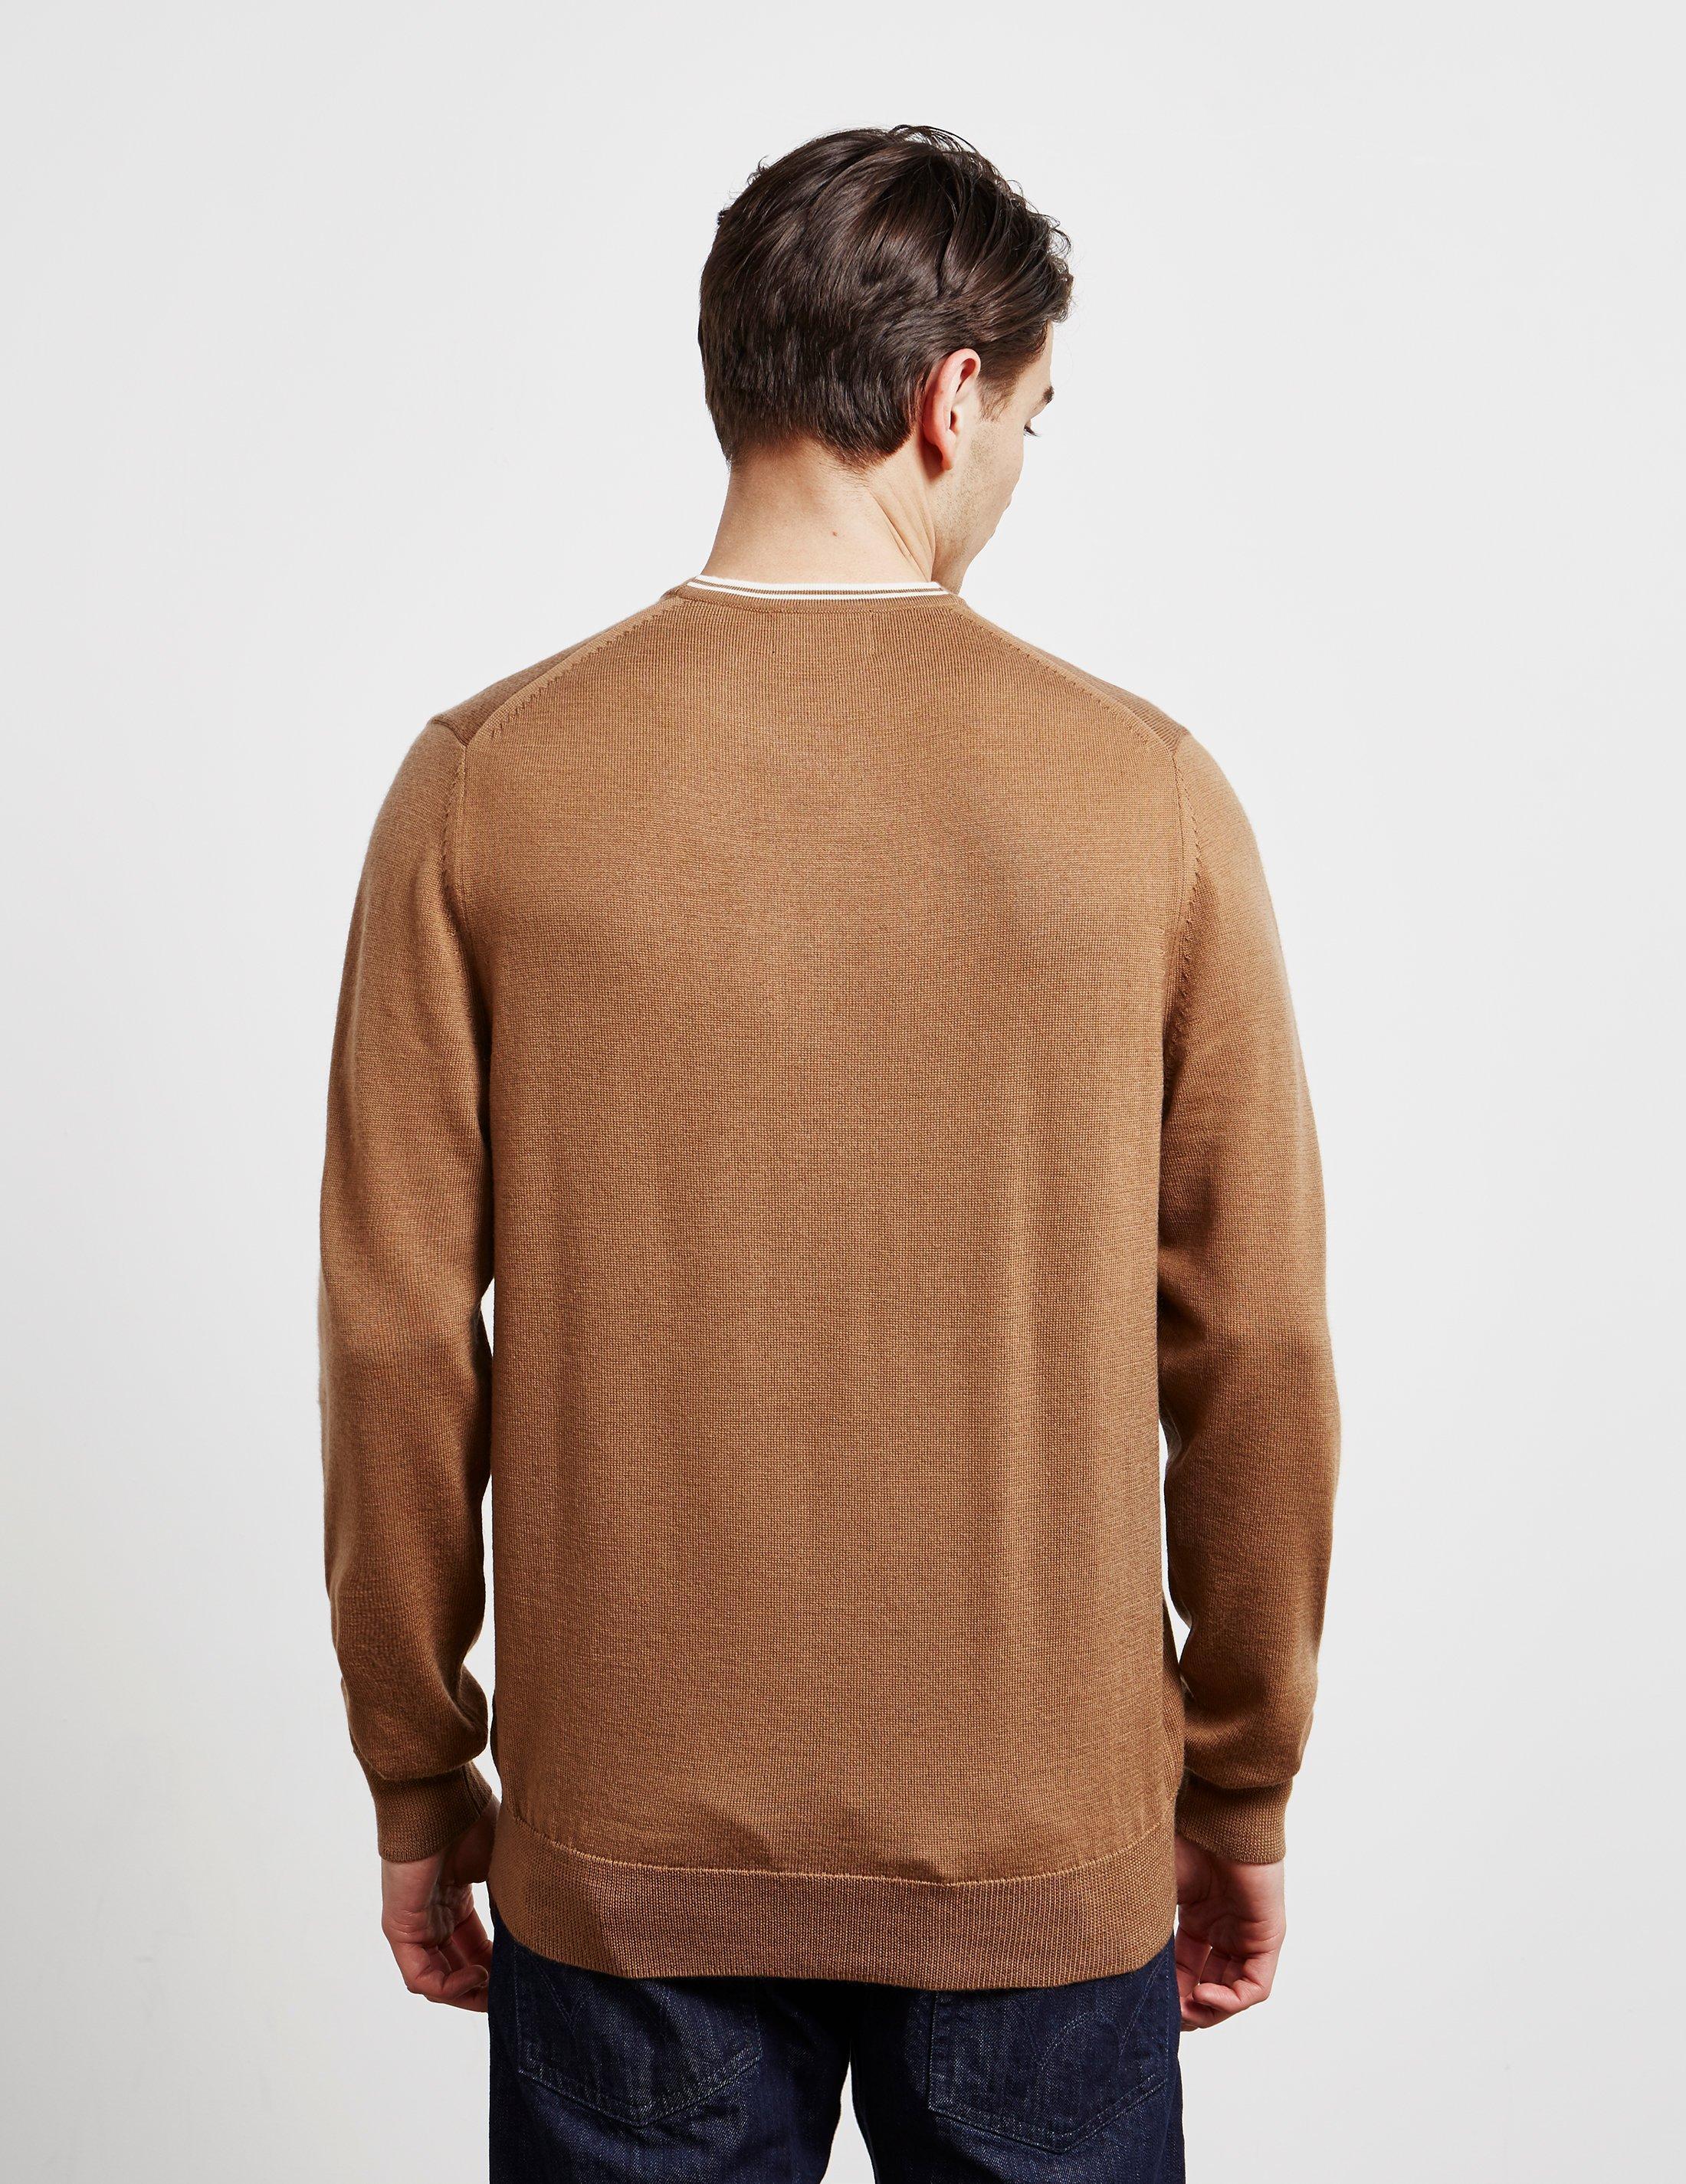 Fred Perry Wool Merino Knitted Jumper Brown for Men - Lyst